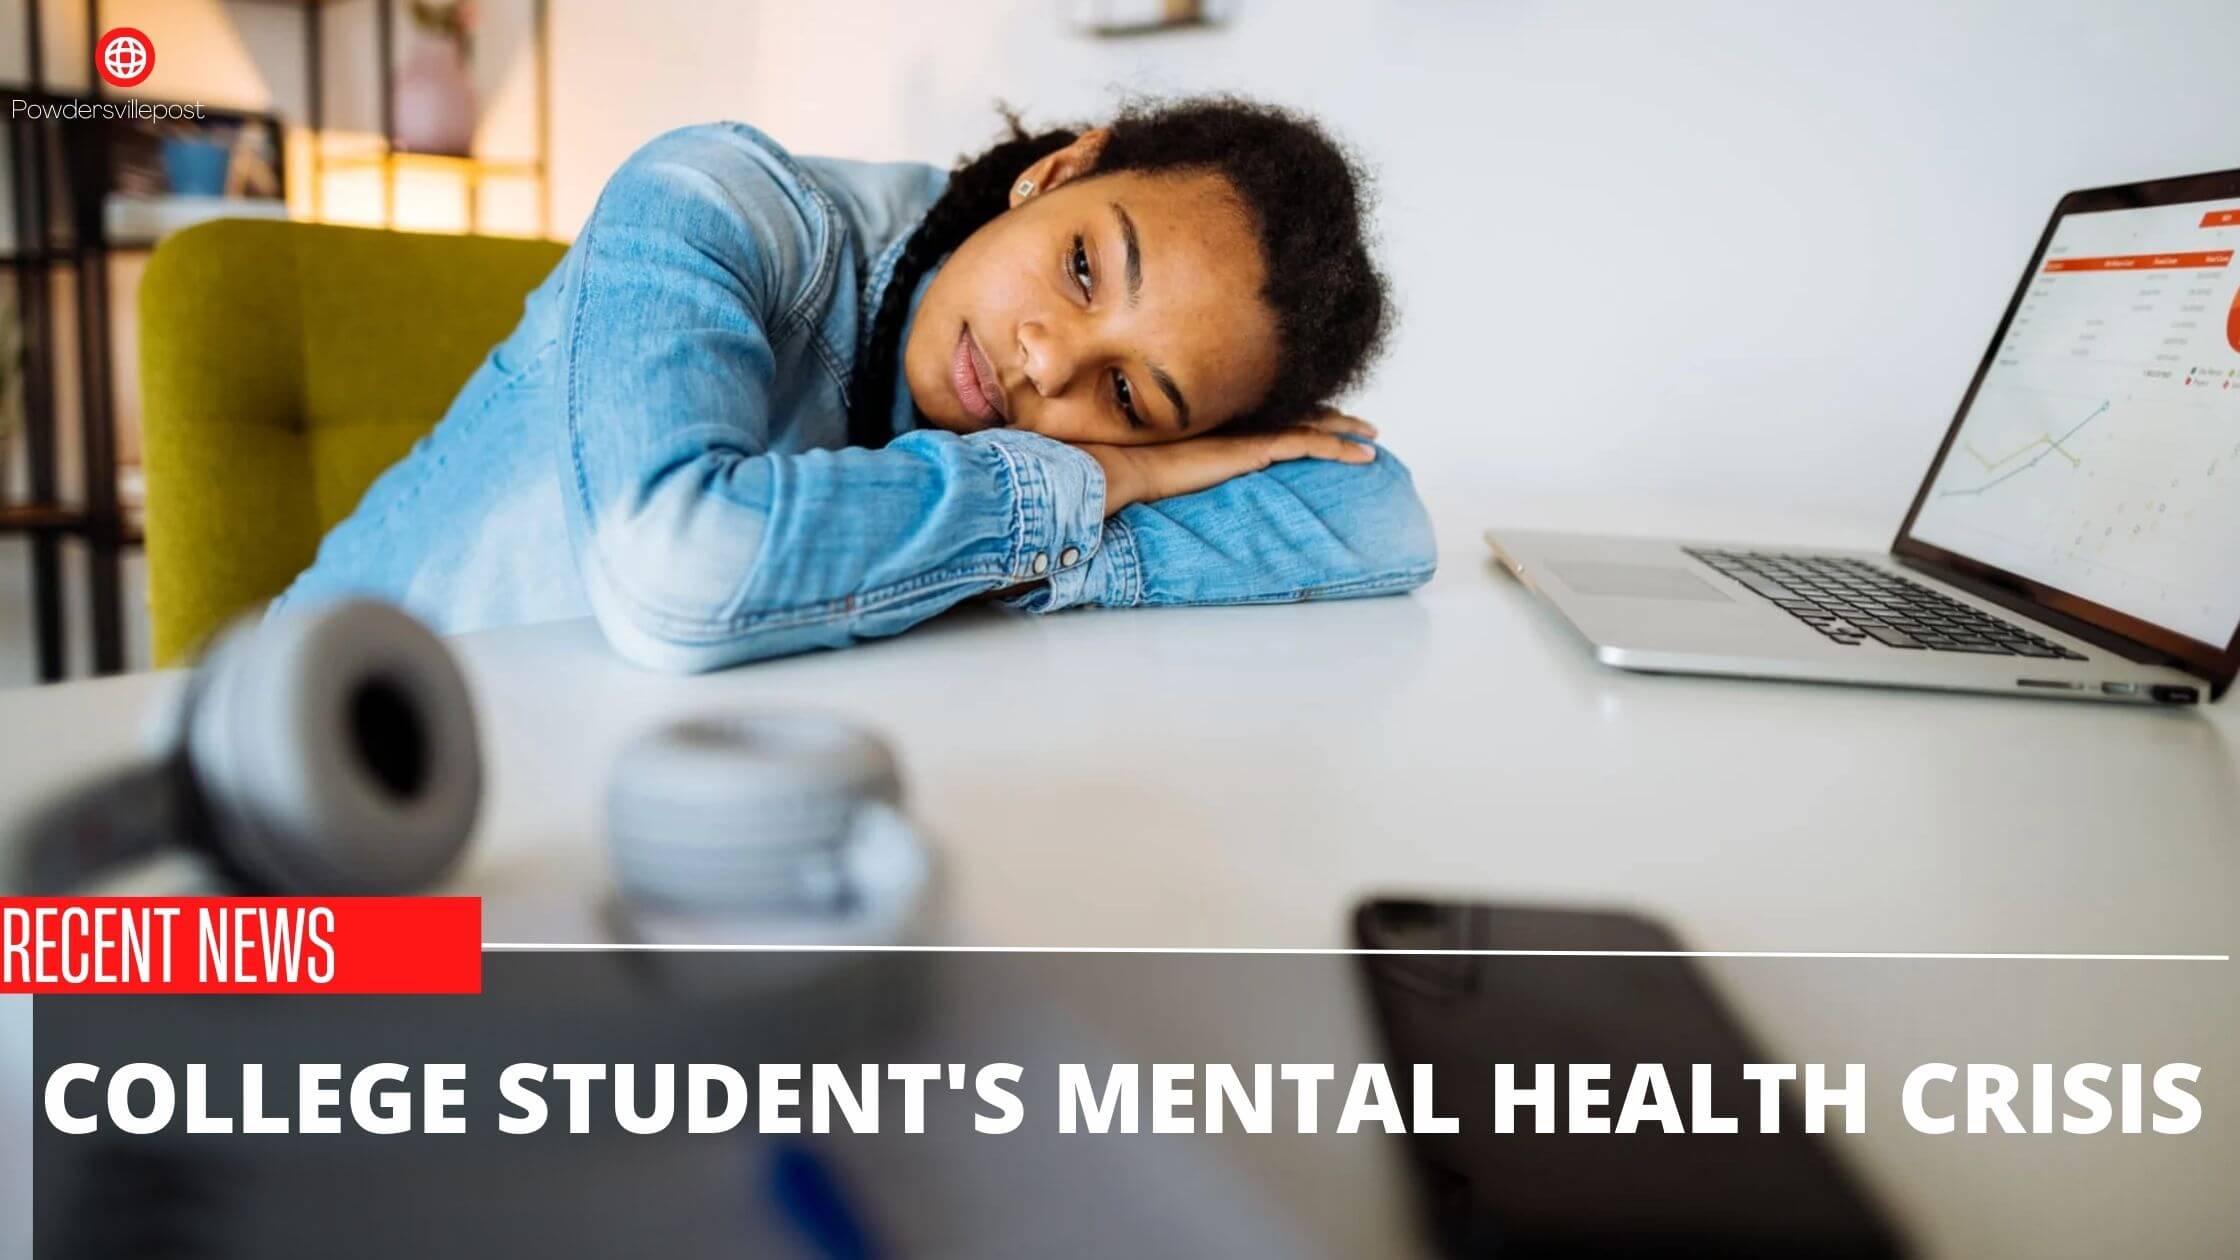 College Student's mental health crisis